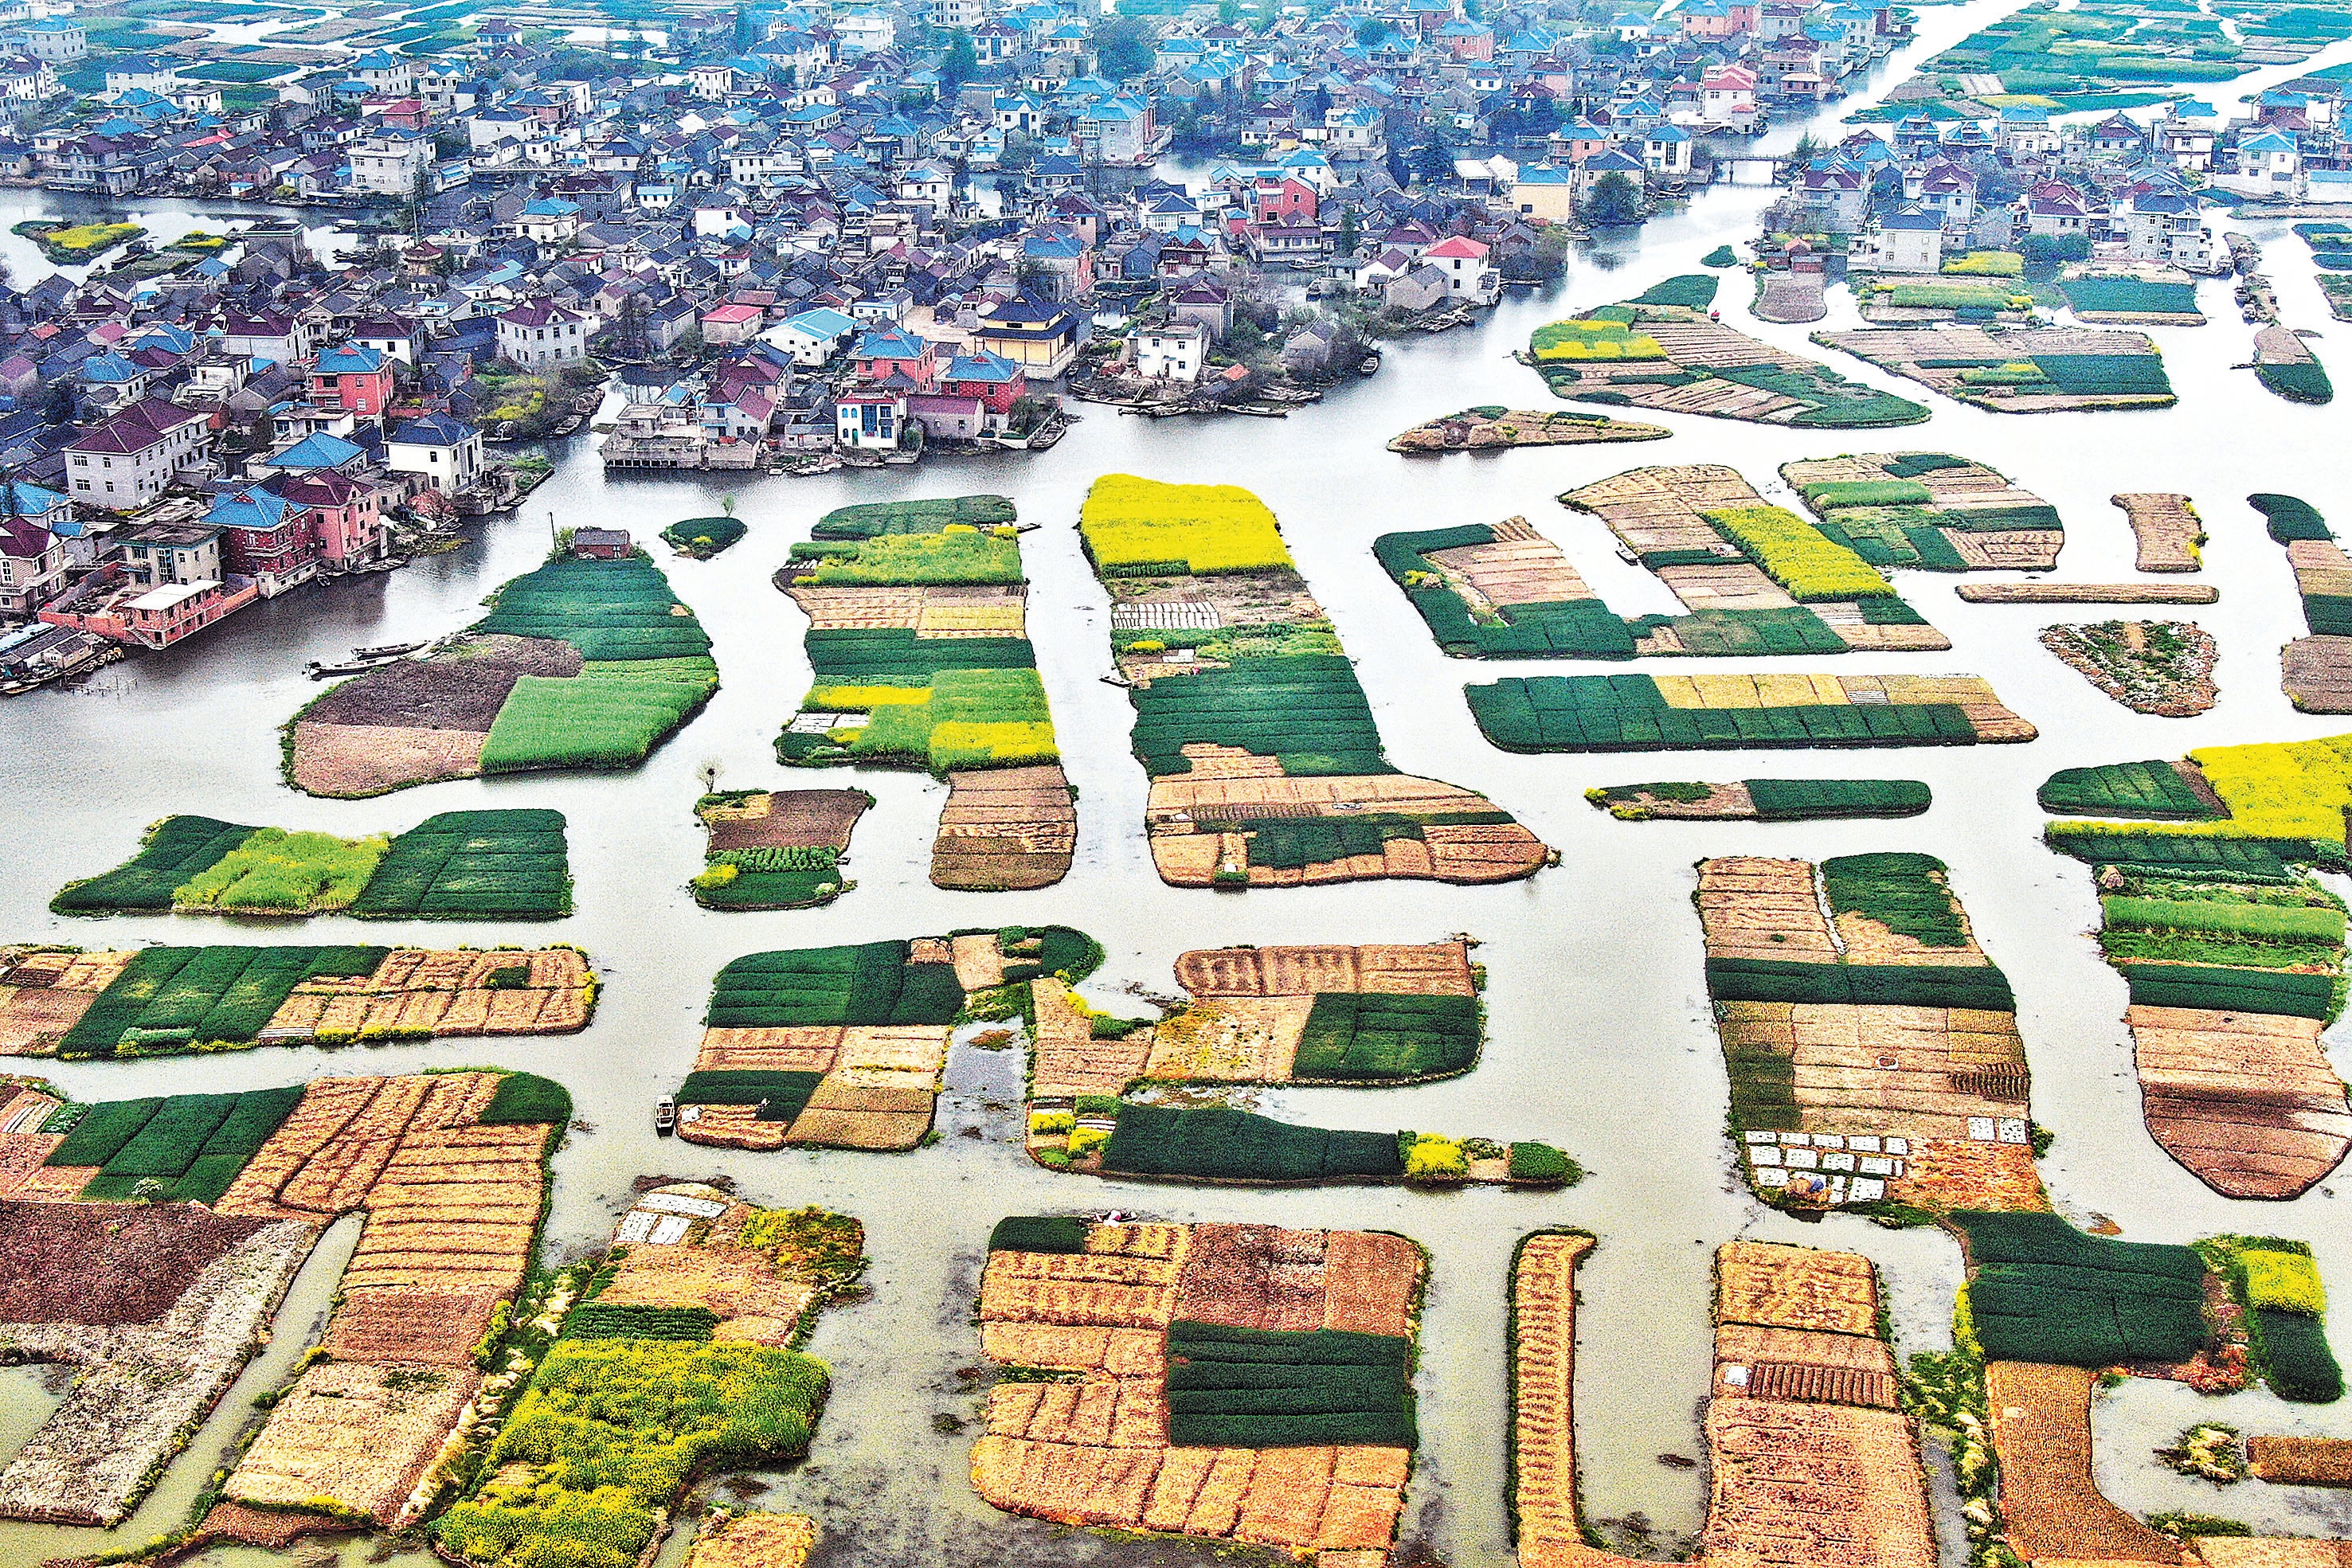 The Xinghua Duotian Irrigation and Drainage System in Jiangsu province stemmed from efforts since the Tang Dynasty (618-907) to prevent flooding